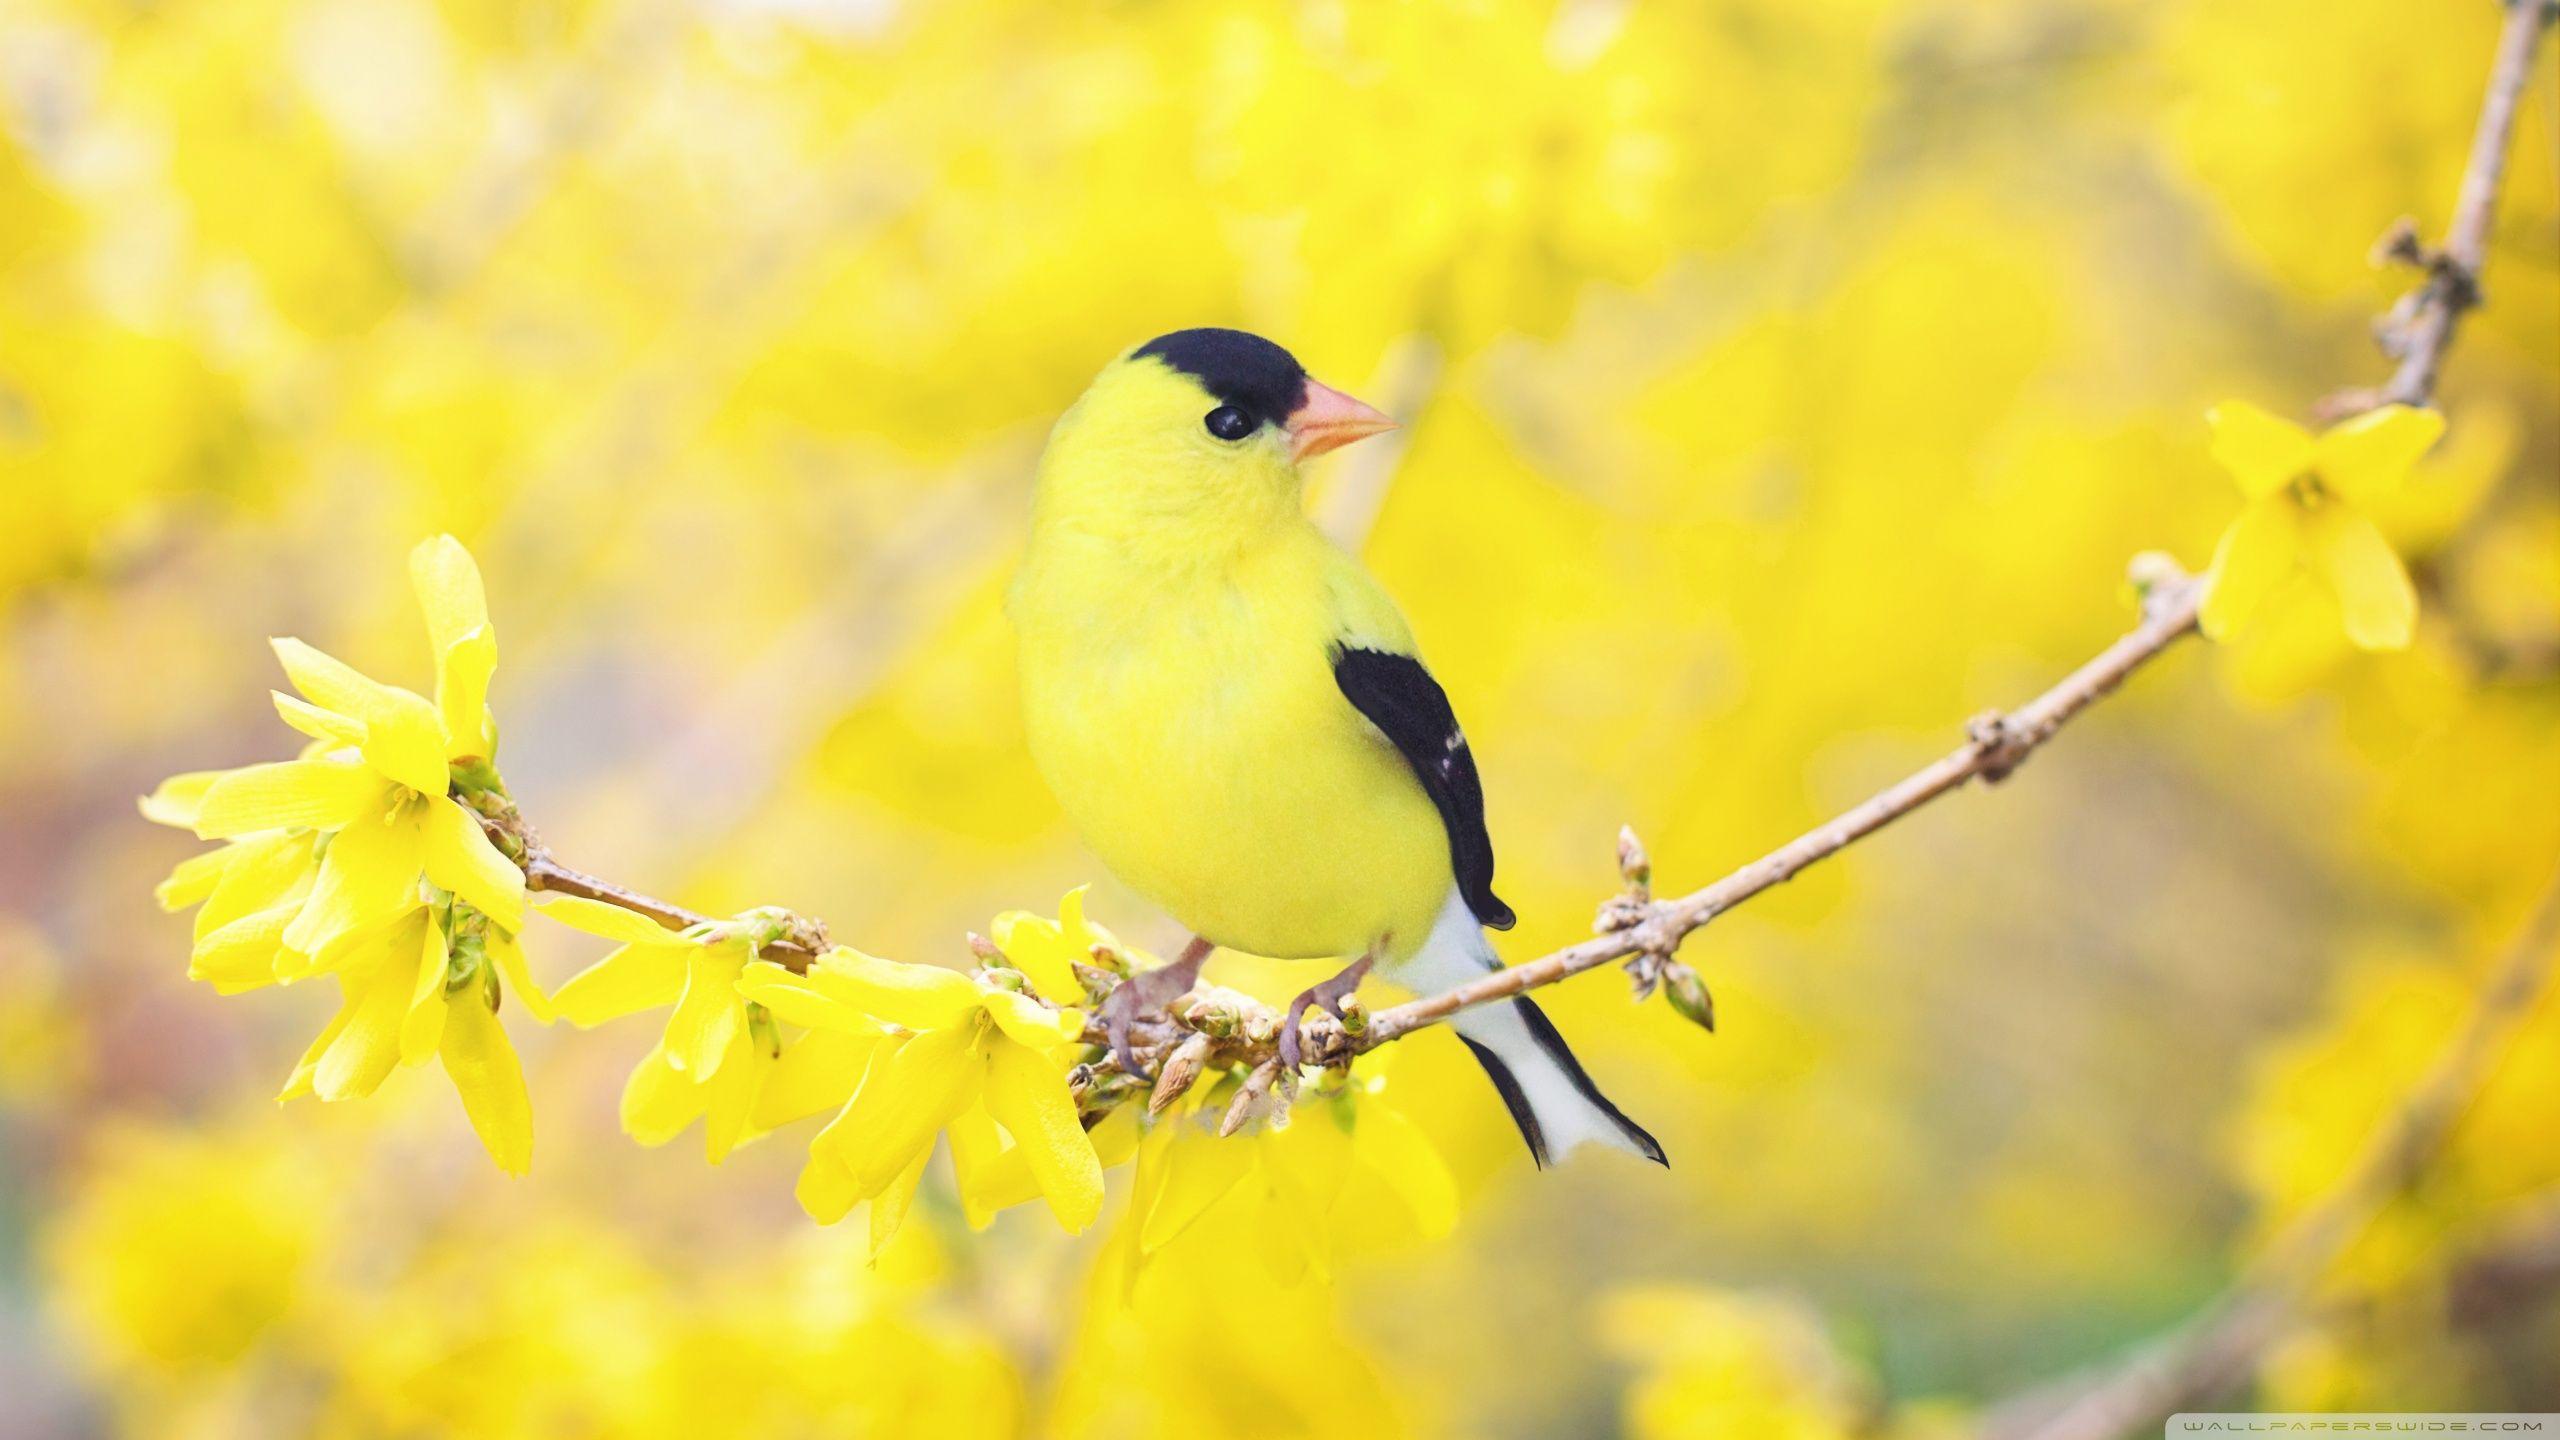 Yellow Wallpaper With Birds and Flowers 2560x1440